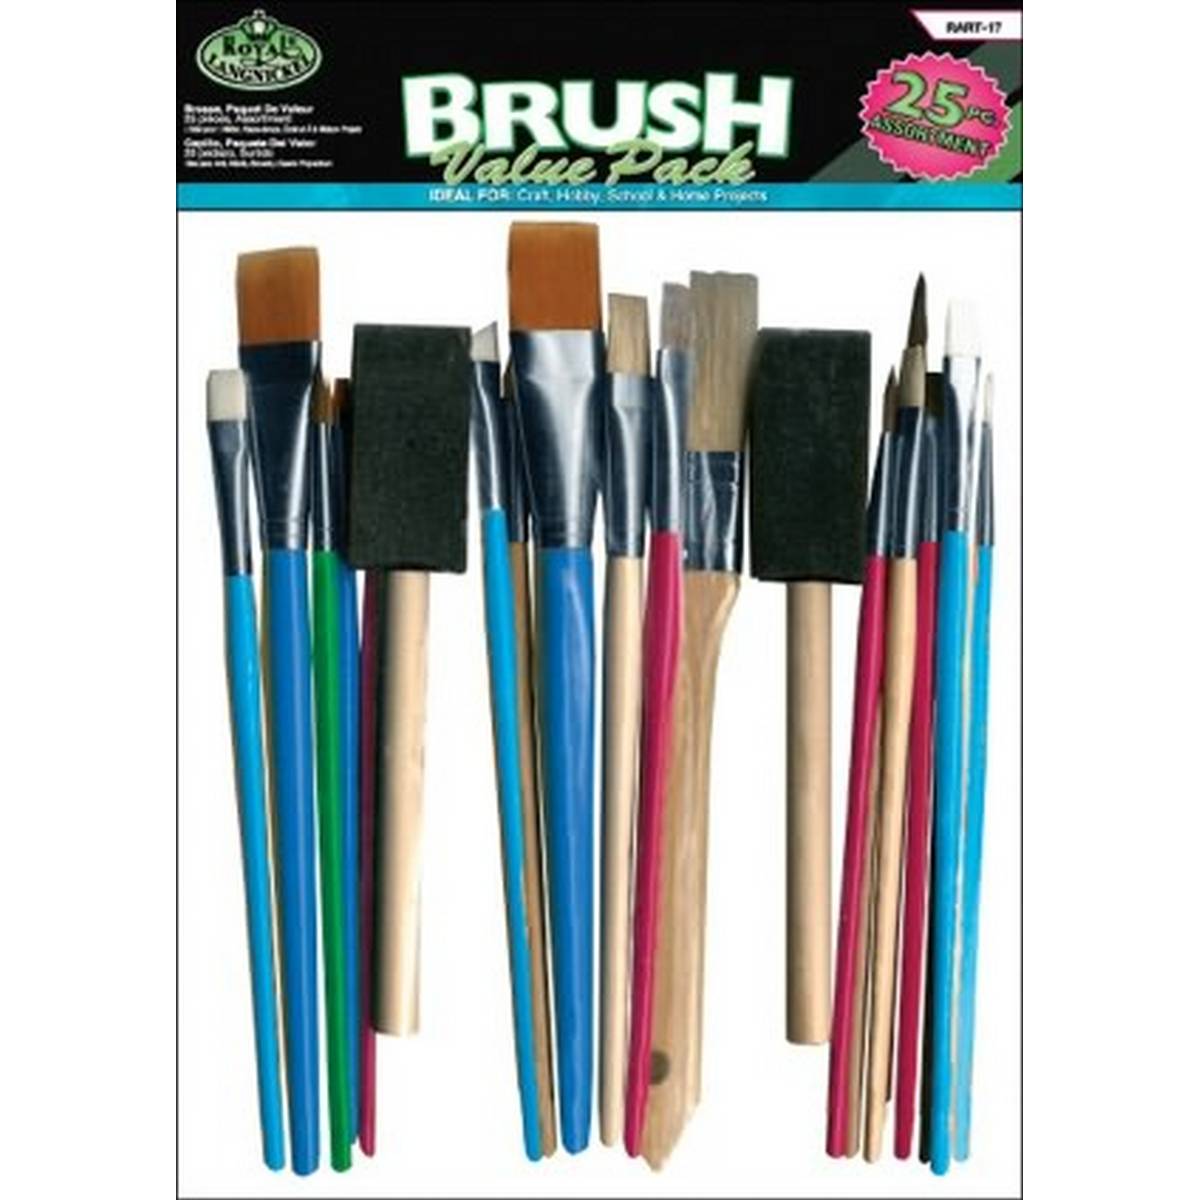 Brush Value Pack of 25 Assorted